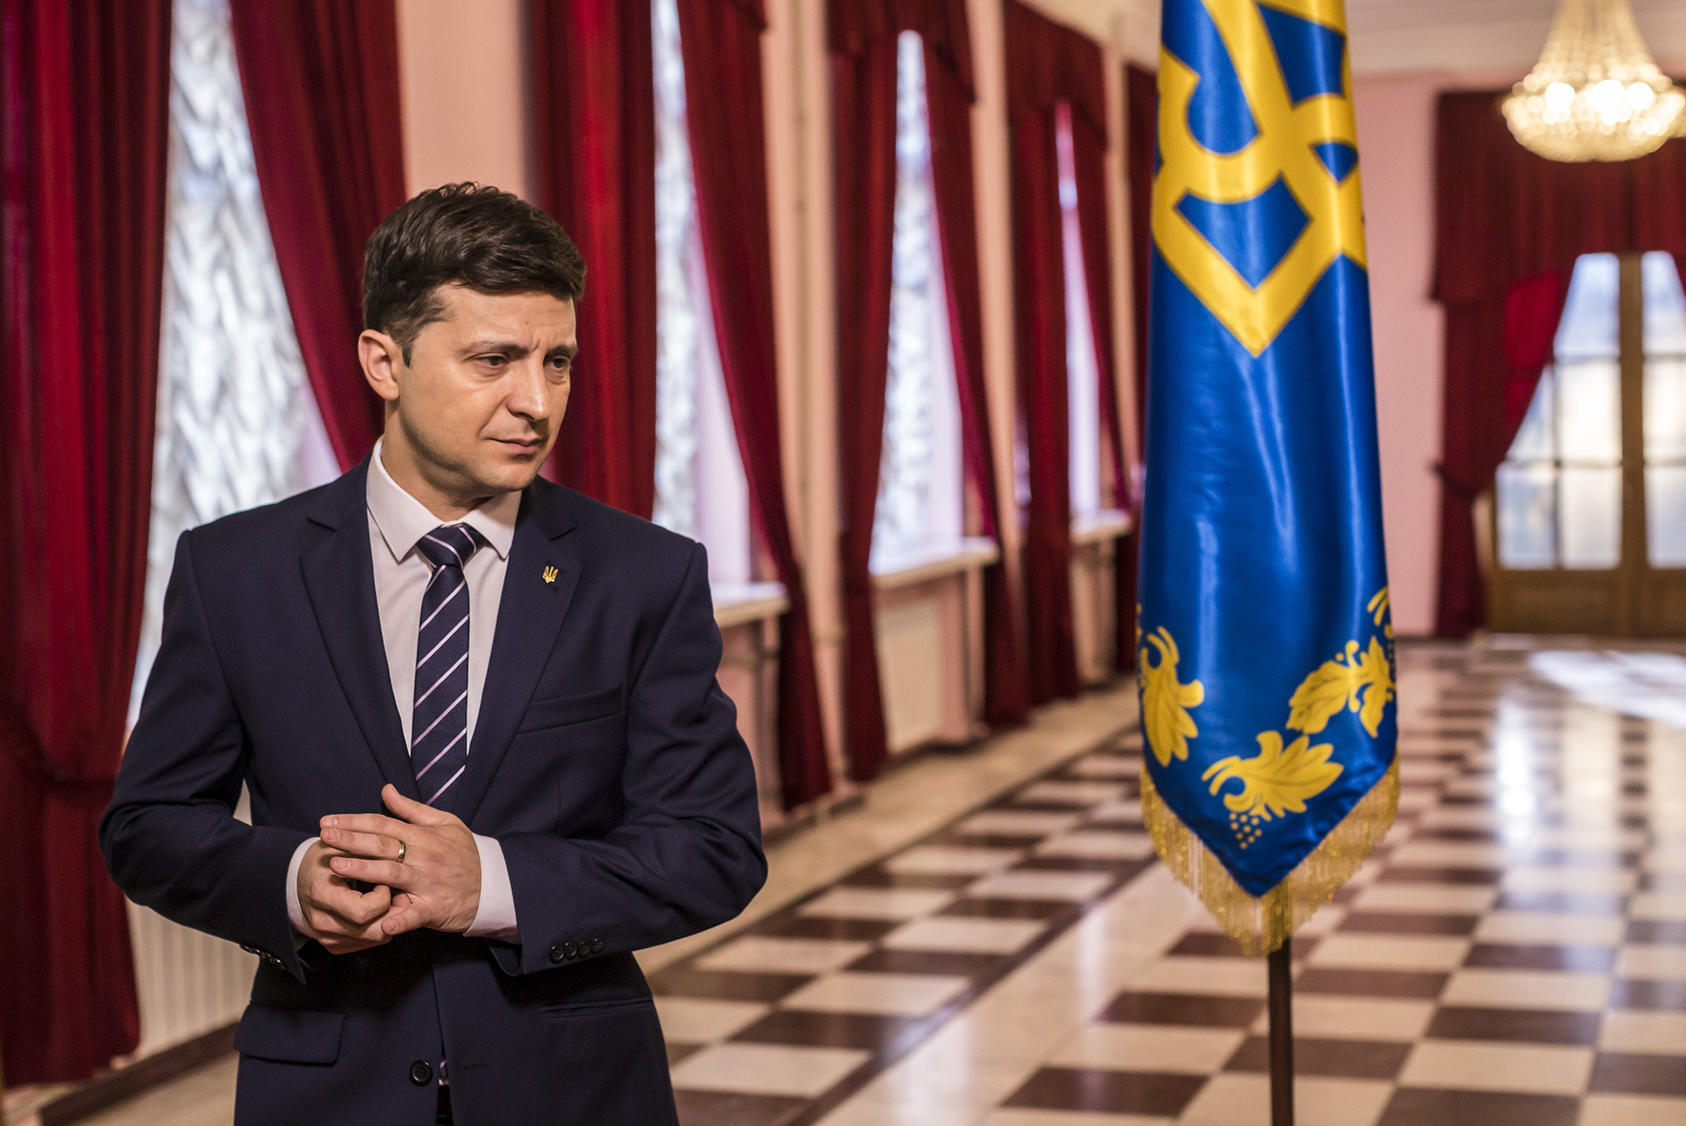 Volodymyr Zelenskiy plays a Ukrainian president on the set of his TV show. He won 30 percent of the vote for Ukraine’s real presidency and will face President Petro Poroshenko in a runoff. (Brendan Hoffman/The New York Times)